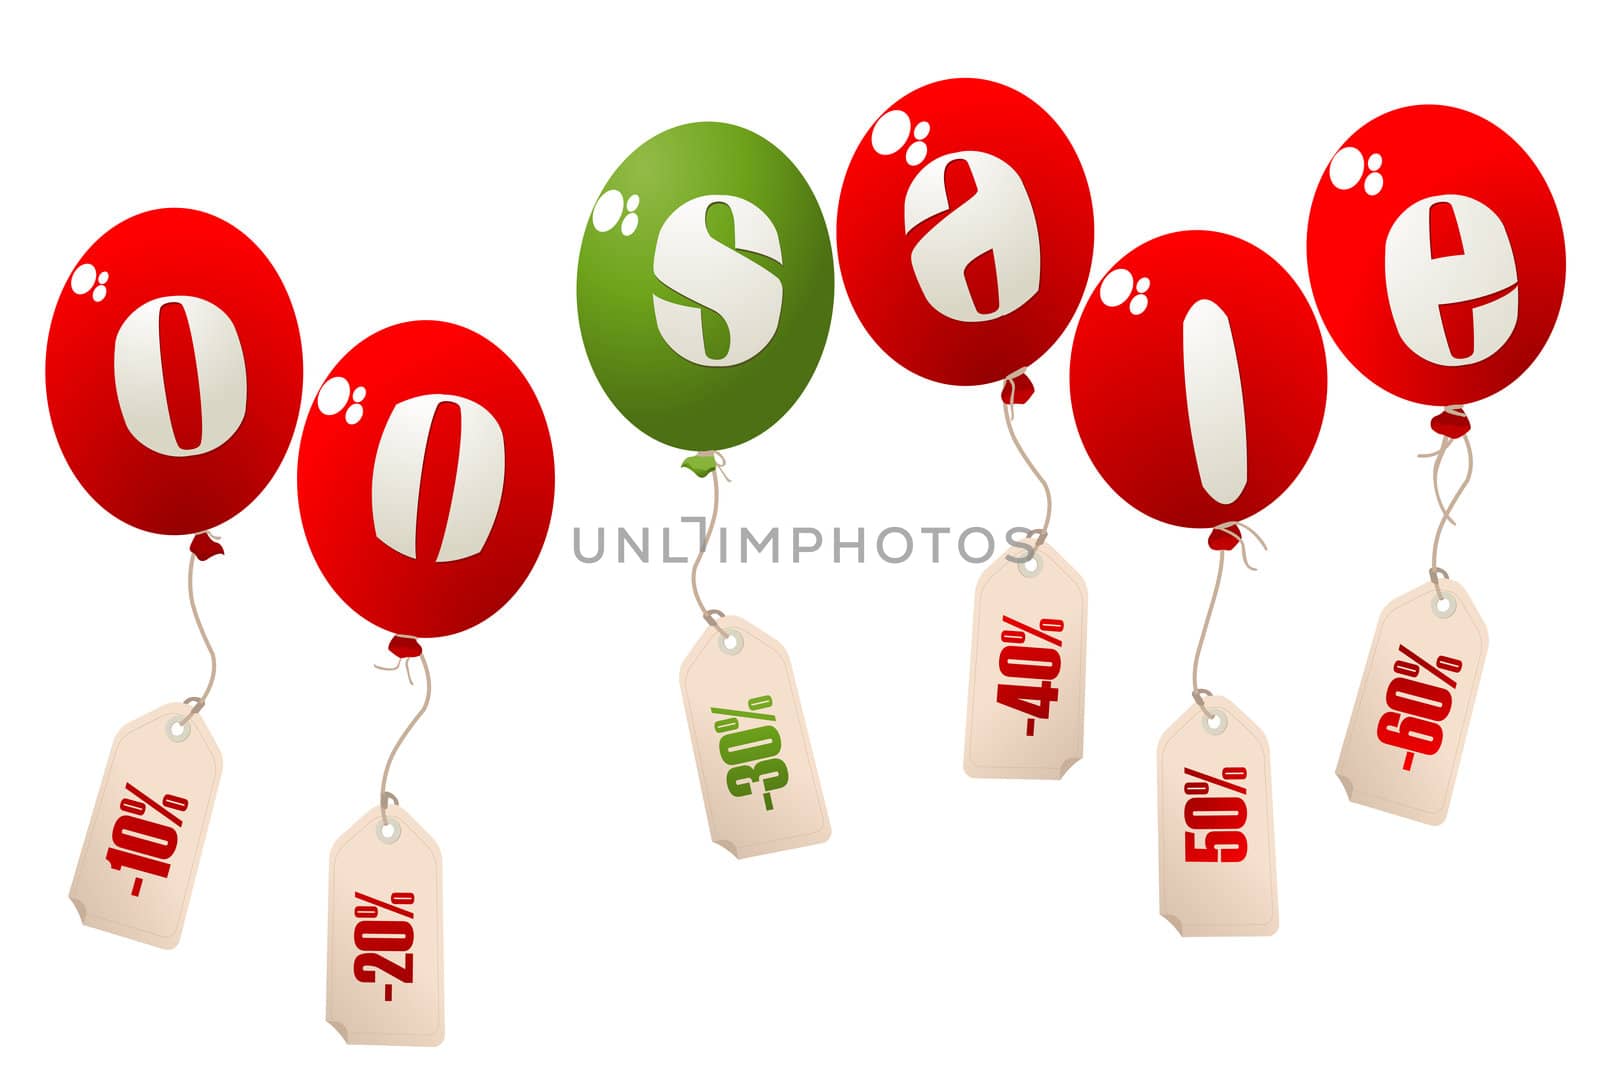 on sale concept on helium balloons and price, retail tags. Isolated objects over white background